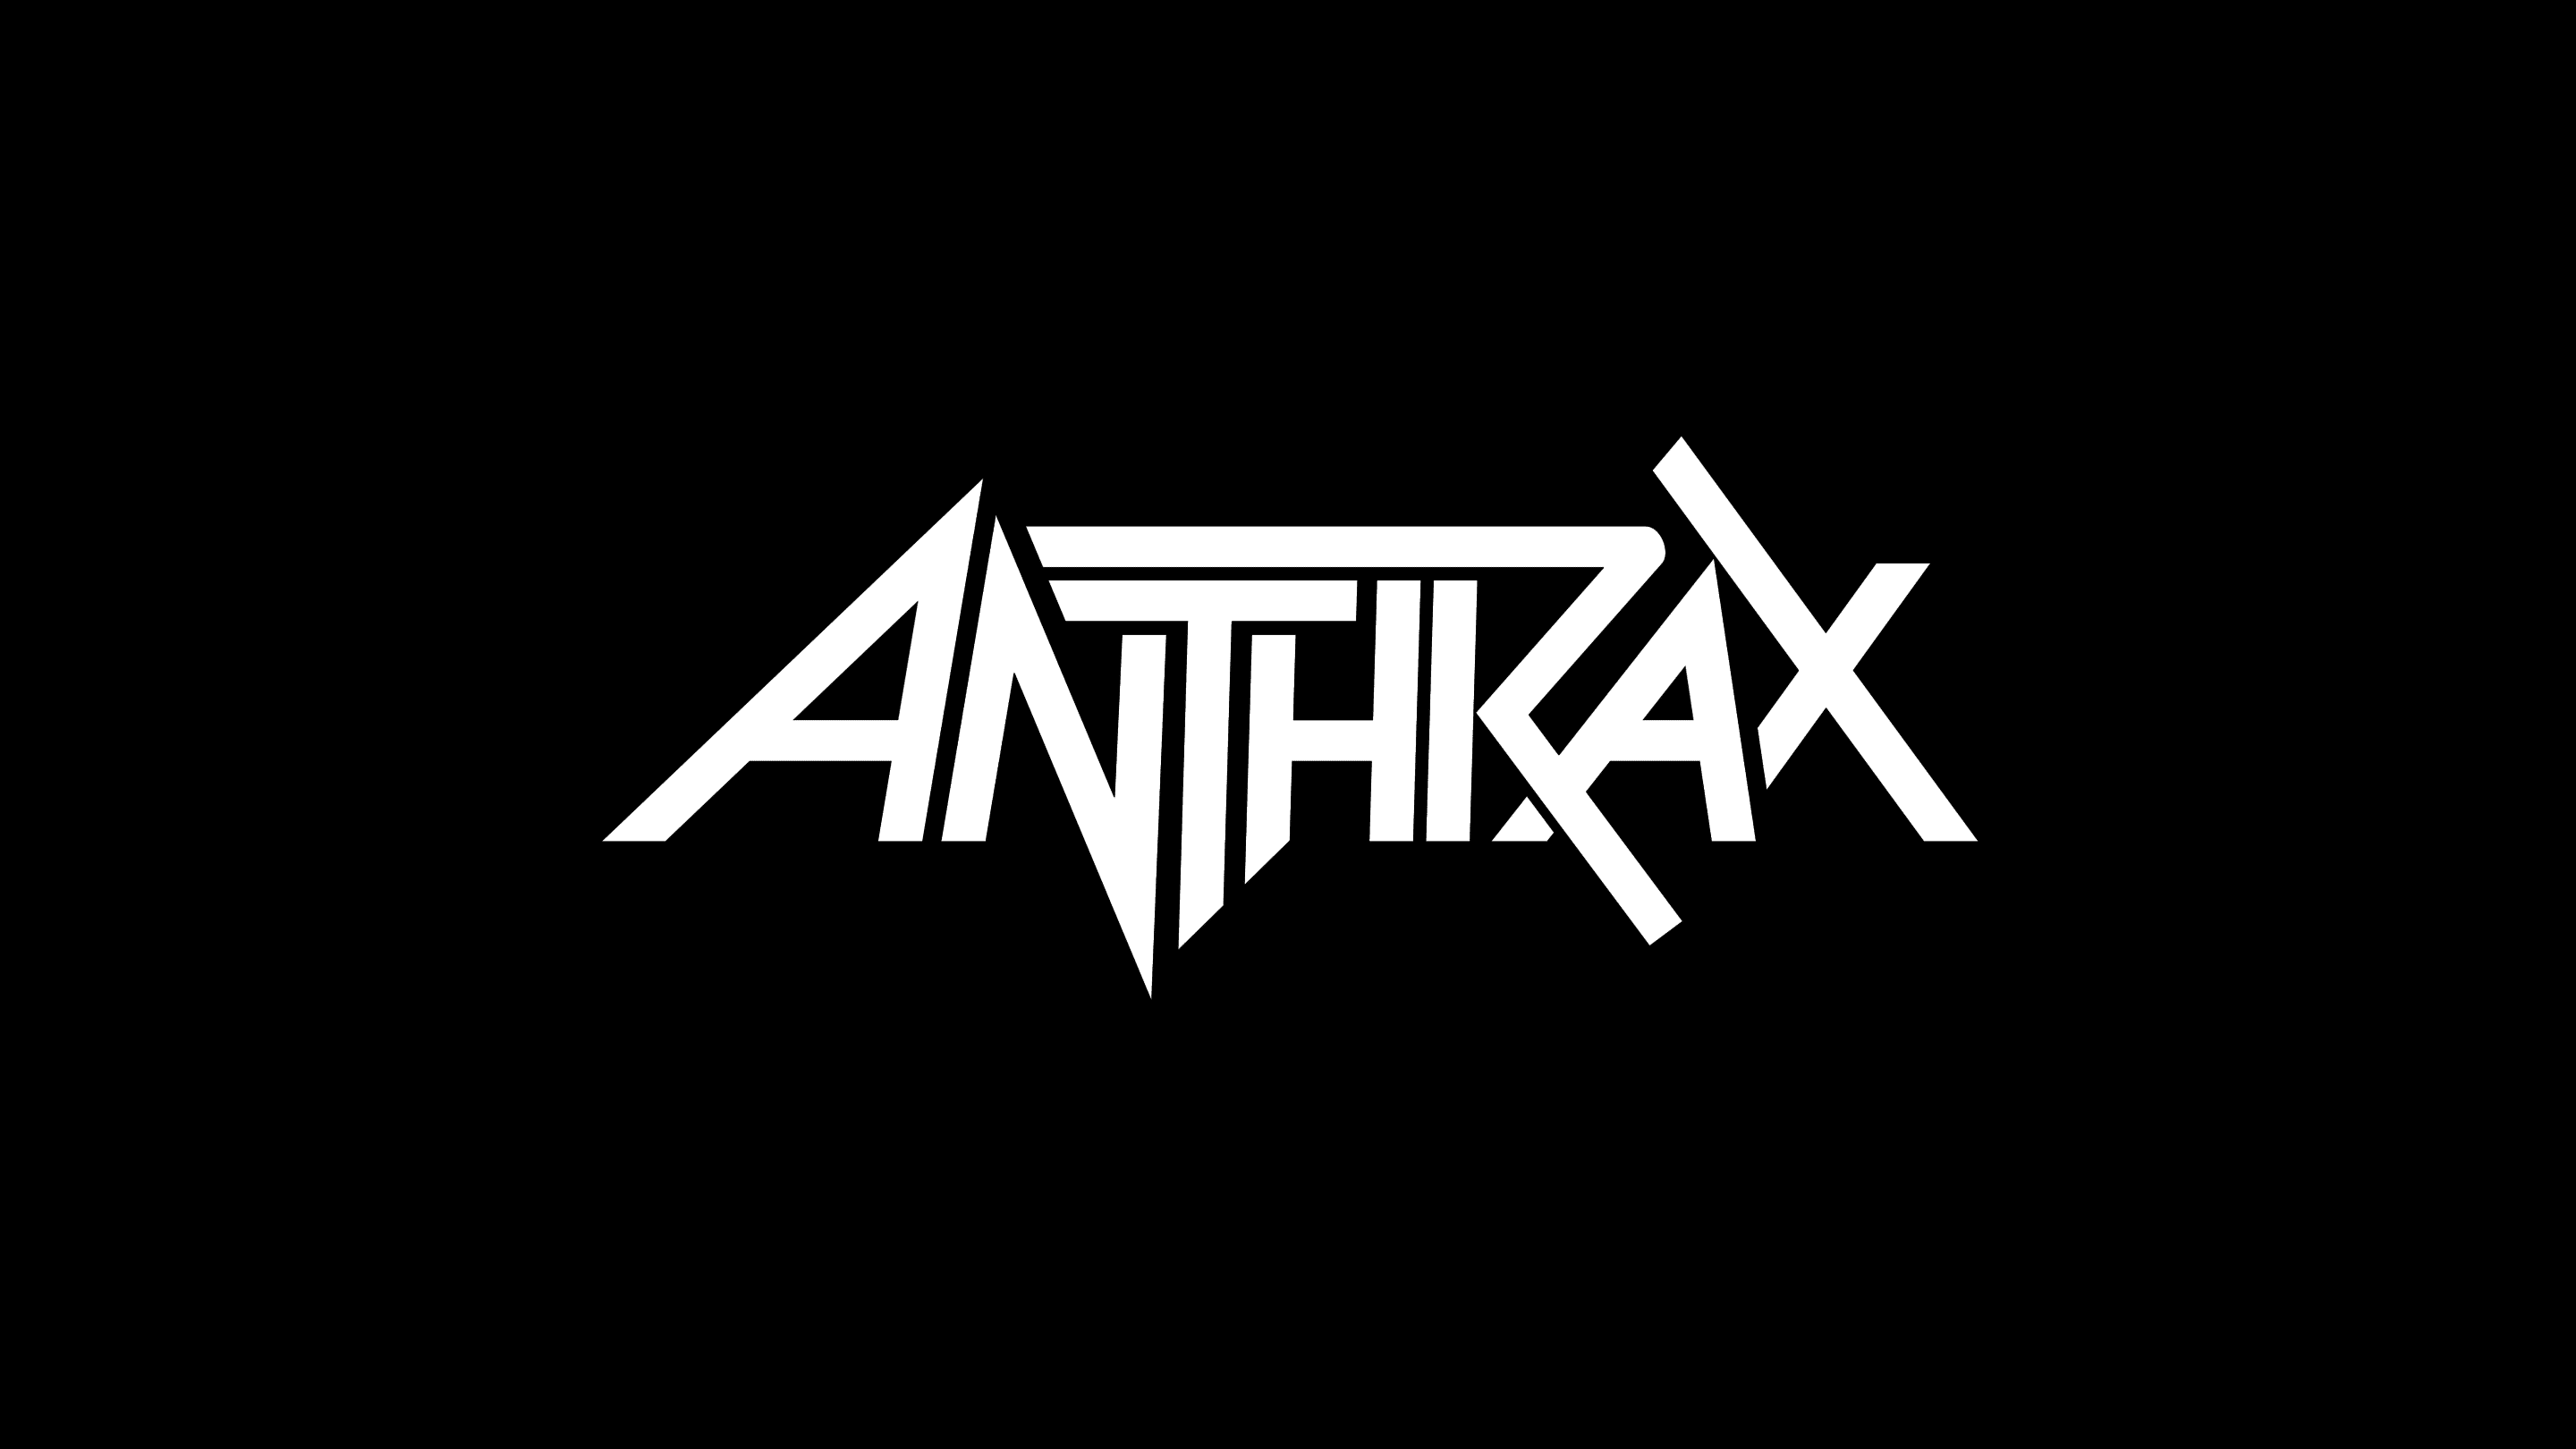 Anthrax x Puck Hcky Anthrax 'Not' Hockey Jersey, Black/Red/White / S